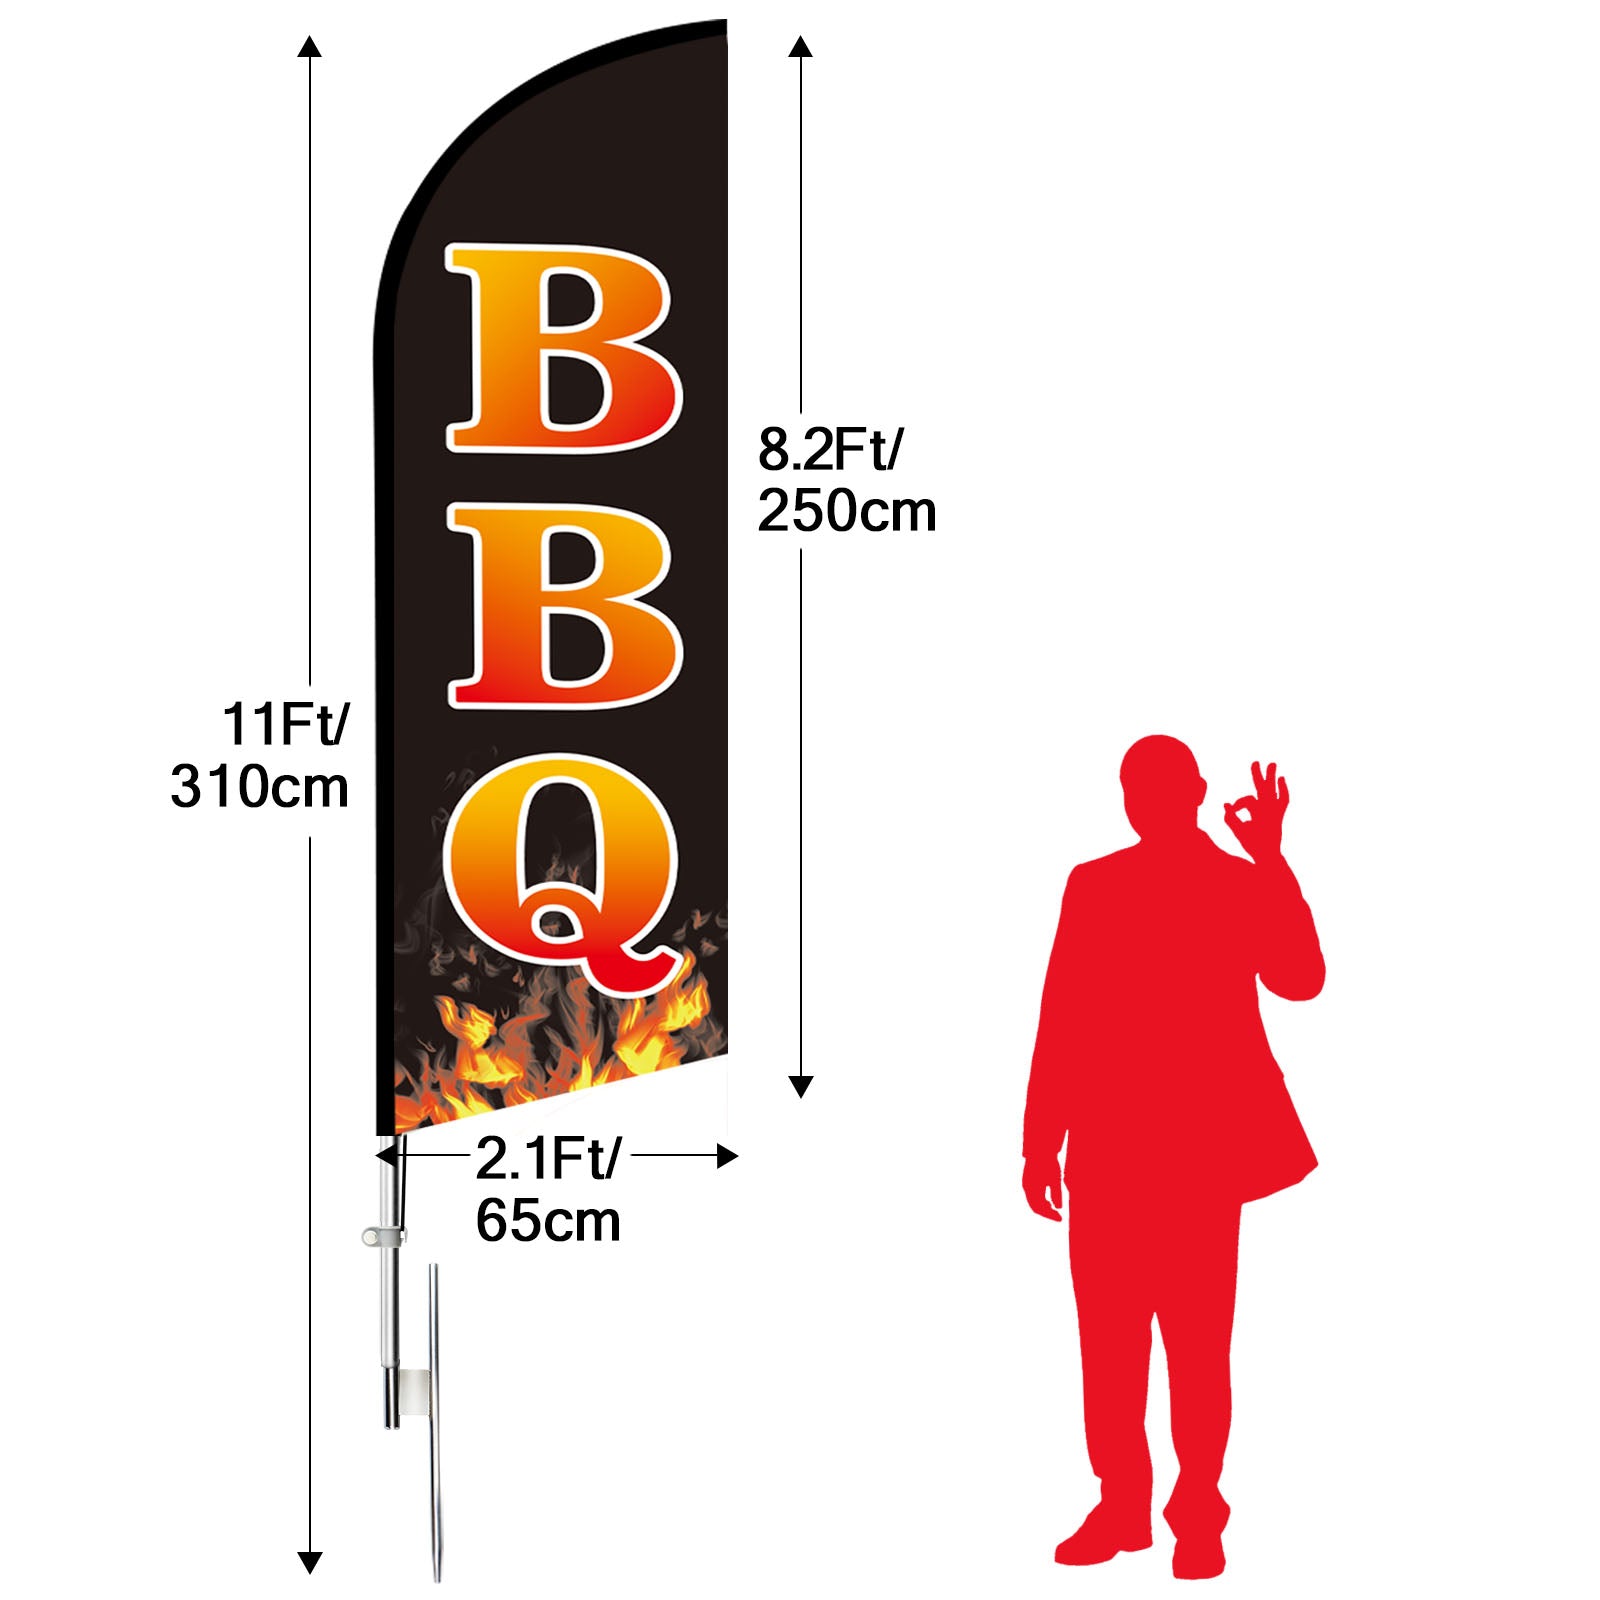 QSUM Barbecue Swooper Flag, 11FT BBQ flags for Businesses with Aluminum Alloy Poles/Stainless Steel Ground Stake/Portable Bag, Barbecue Signs for Outdoor